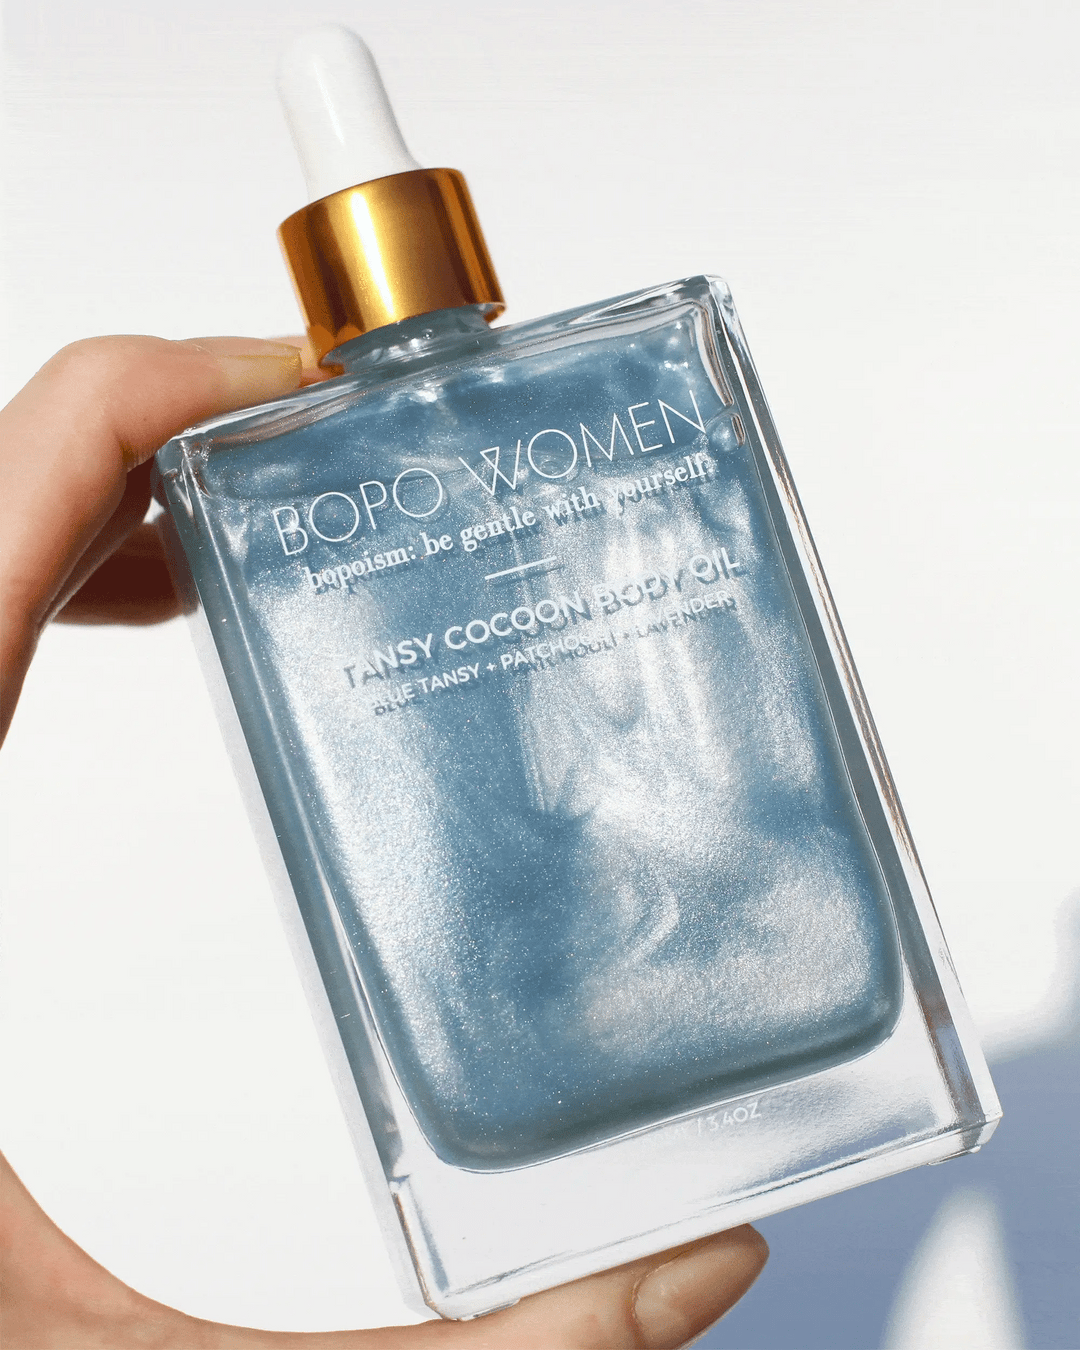 Bopo Women | Tansy Cocoon Body Oil - Blue Shimmer | Shut the Front Door